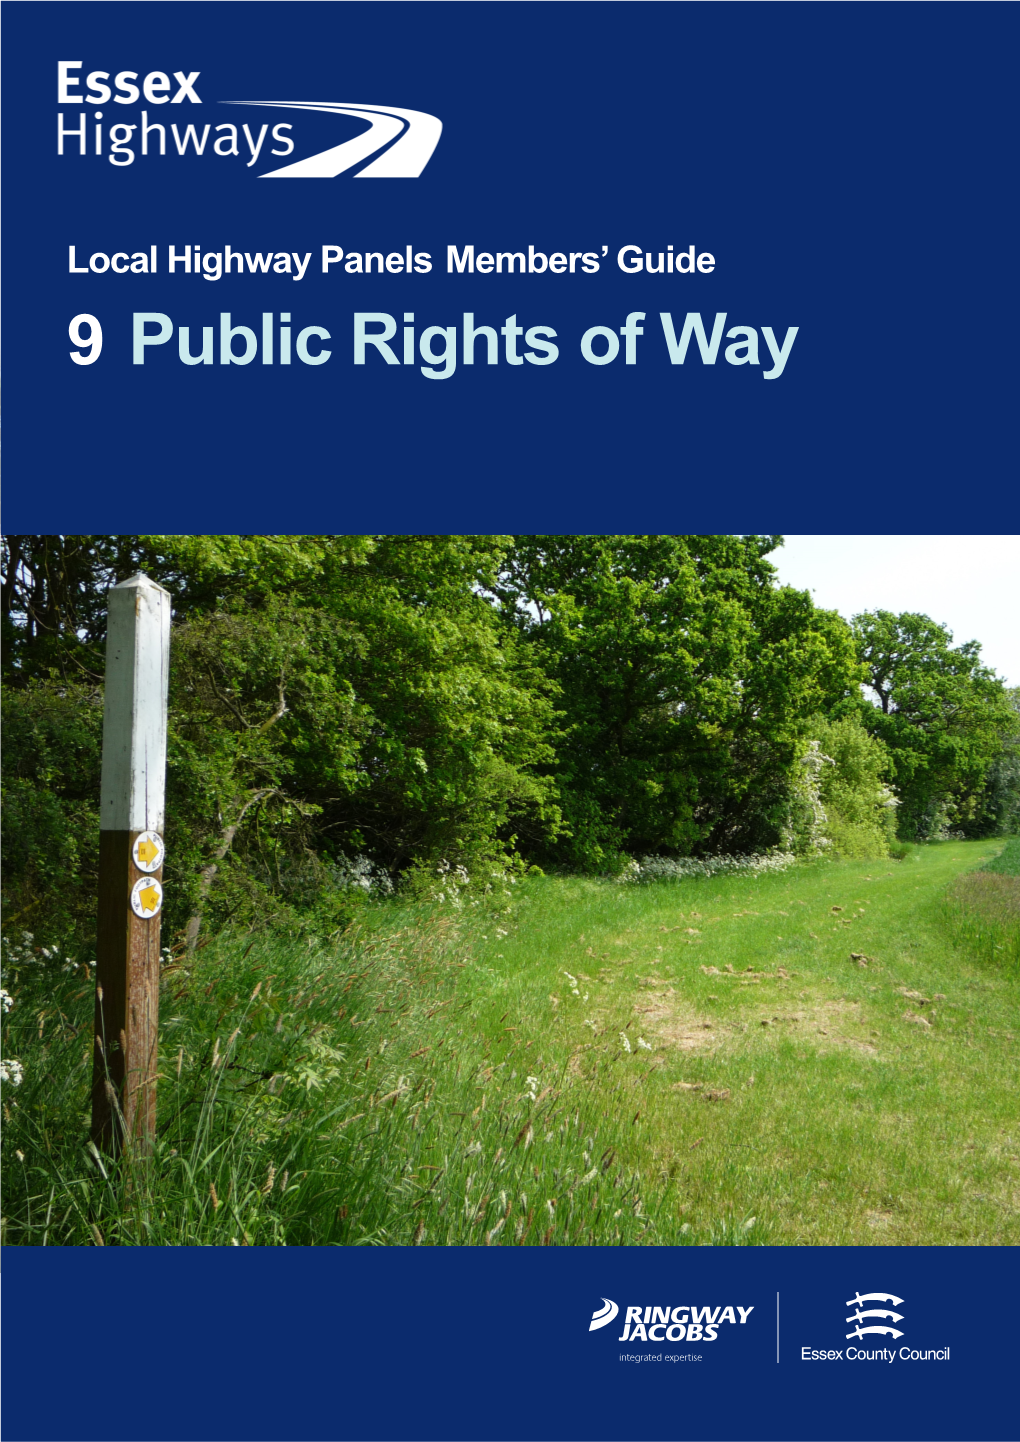 9 Public Rights of Way 2 Local Highway Panels (LHP) Members Guide 2021/22